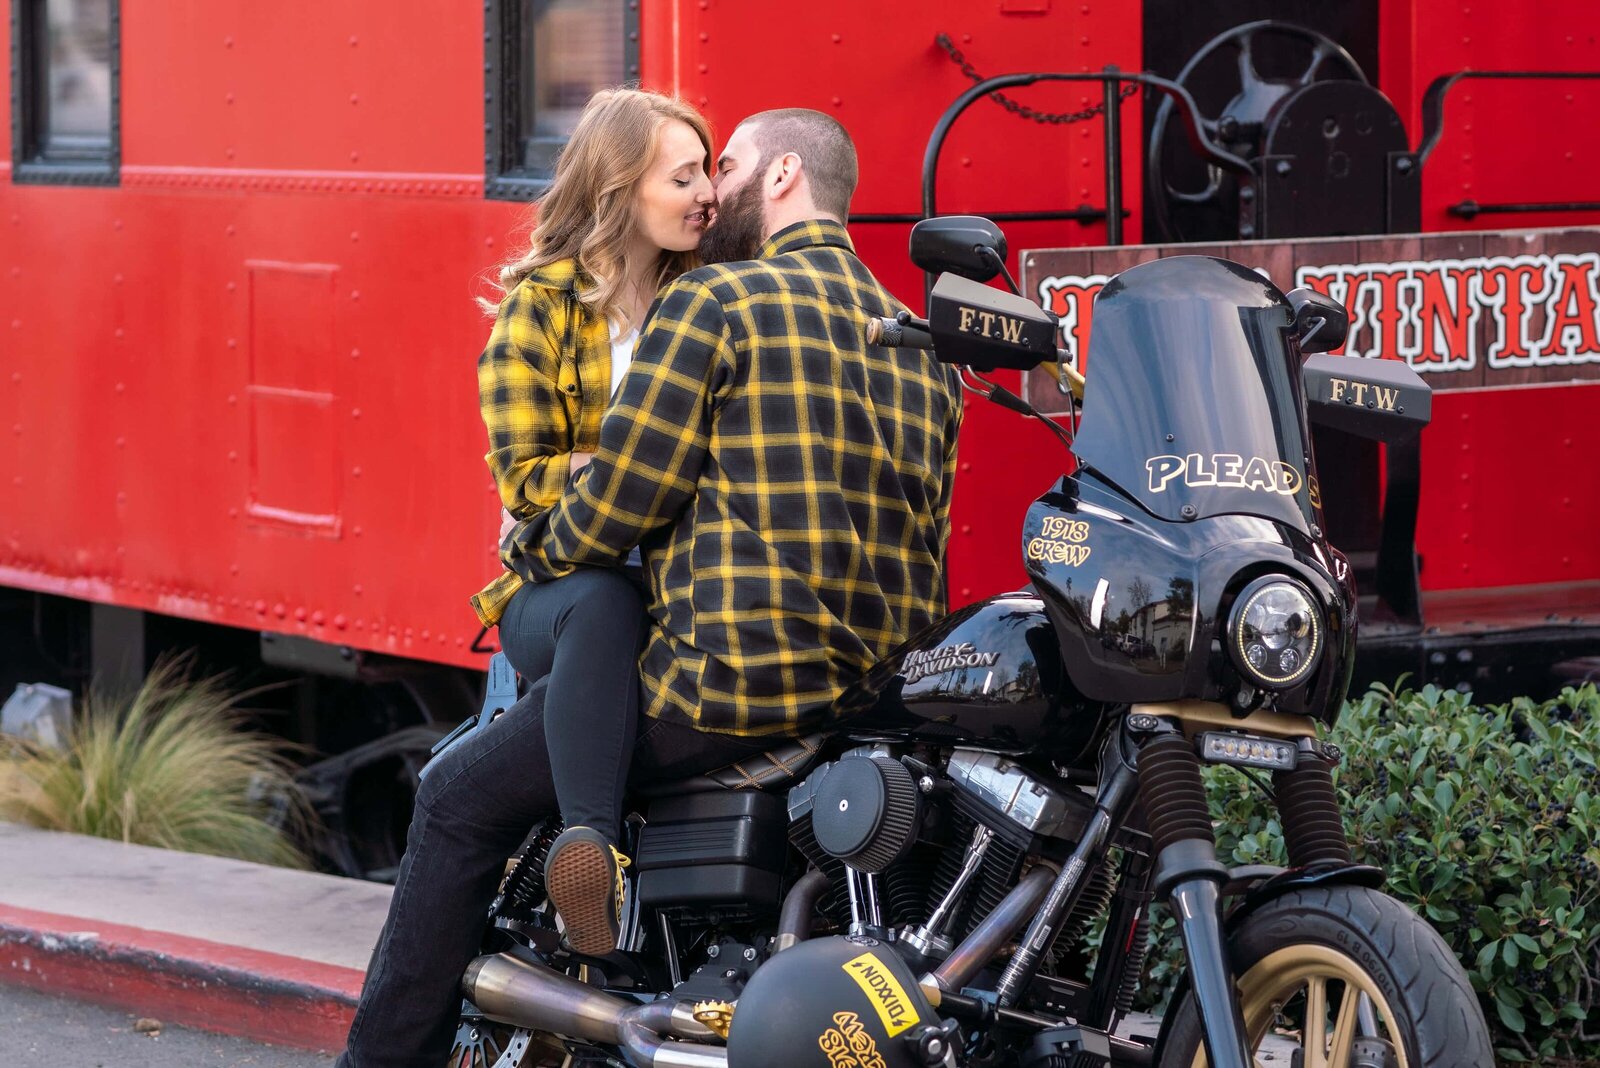 Man sitting facing blond woman. Both in yellow checkered shirt on Harley mortorcycle. Red train in background.